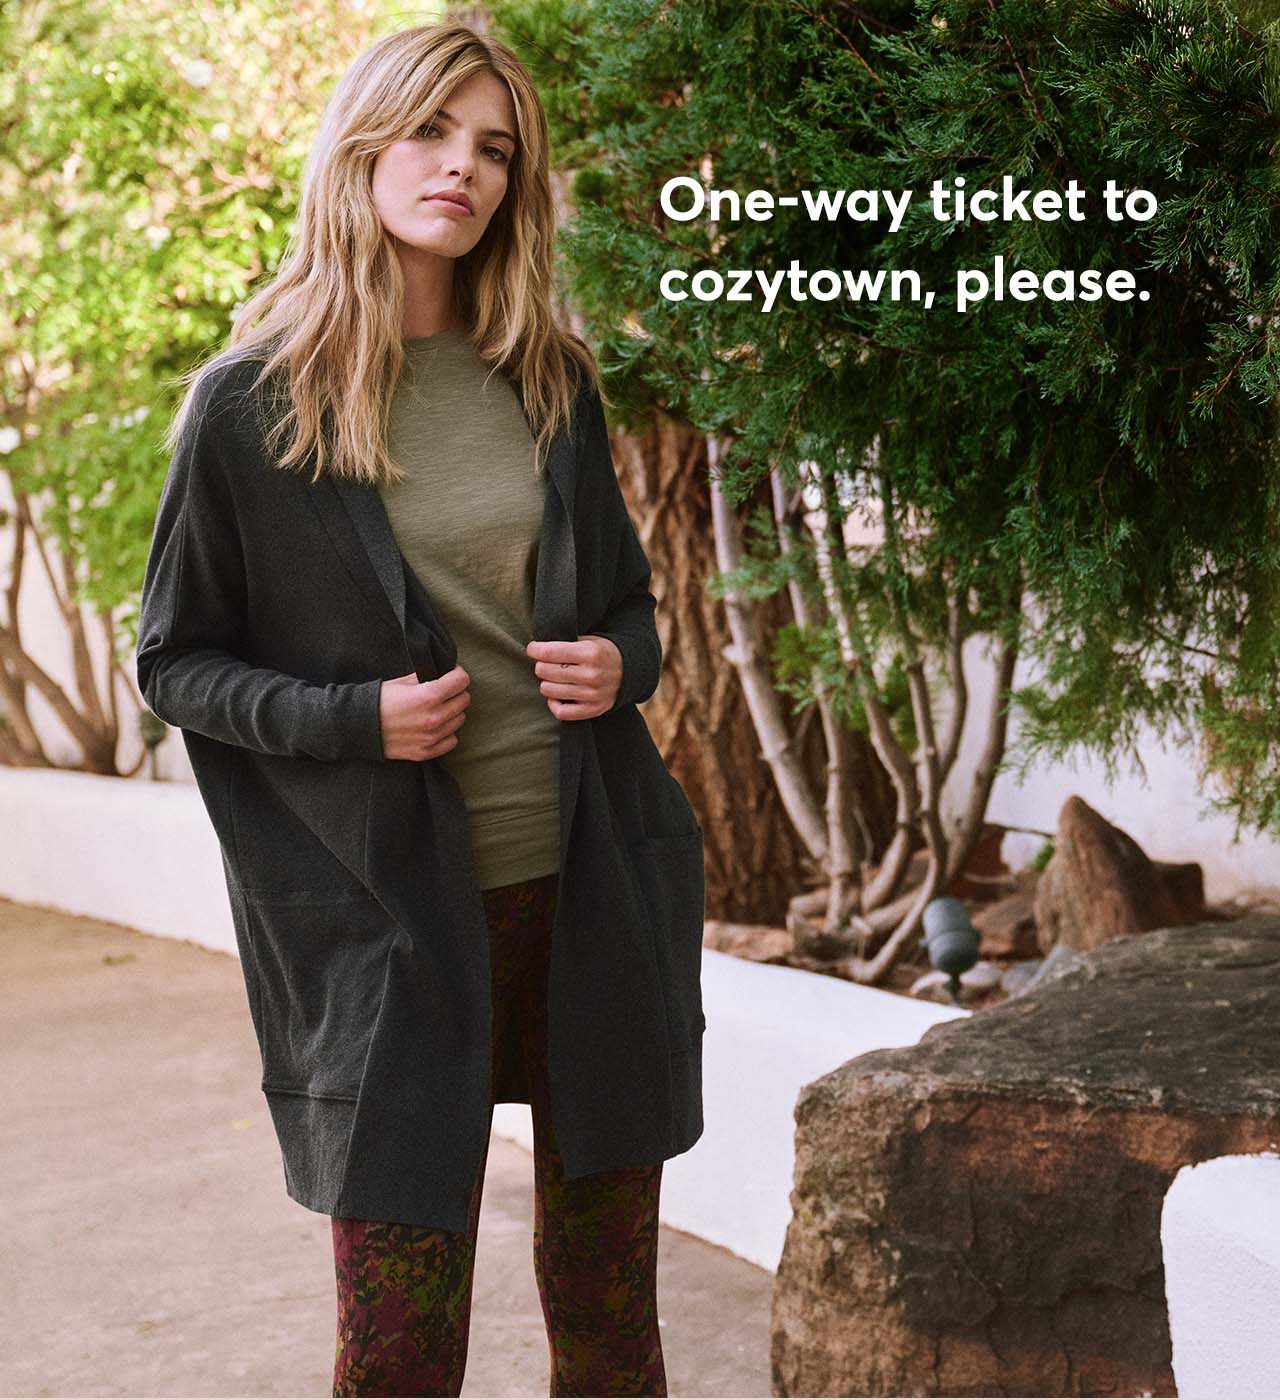 One-way ticket to cozytown, please.